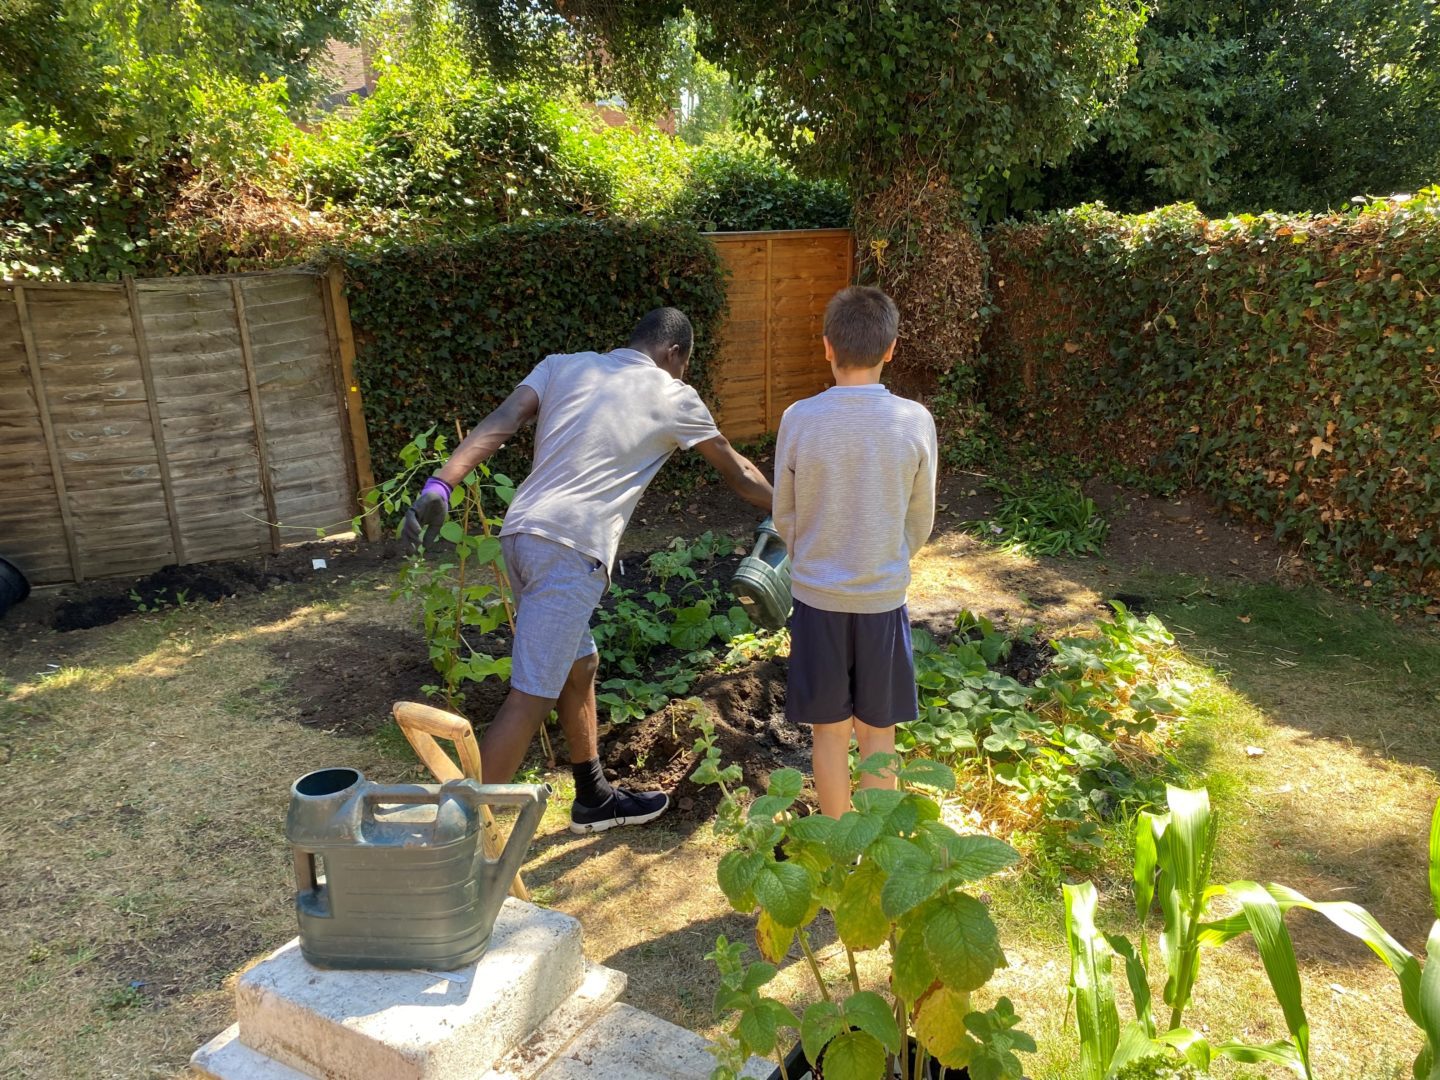 Pupils help with the garden